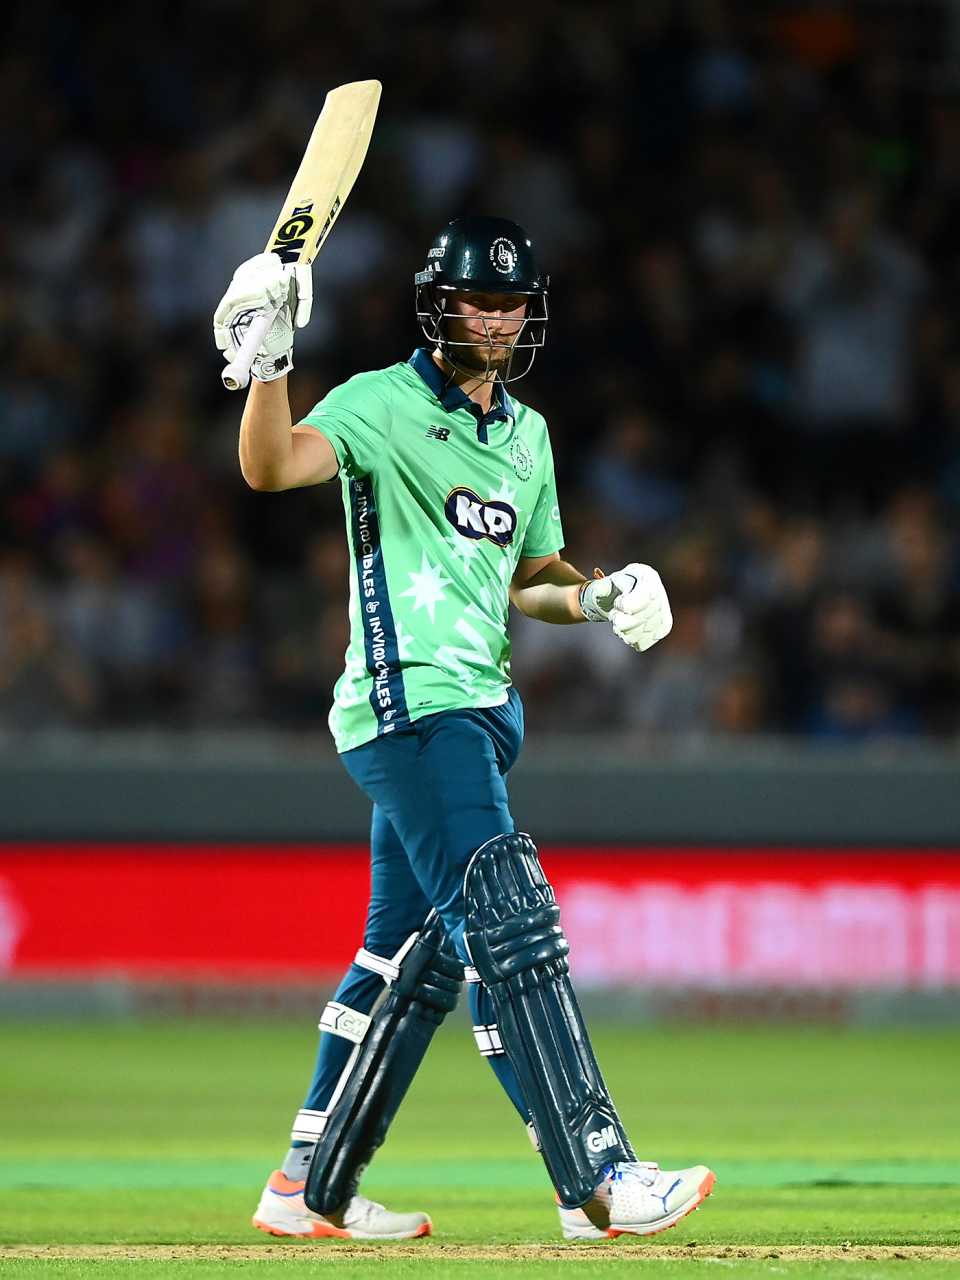 Will Jacks made a 32-ball half-century, London Spirit vs Oval Invincibles, Men's Hundred, Lord's, August 27, 2022